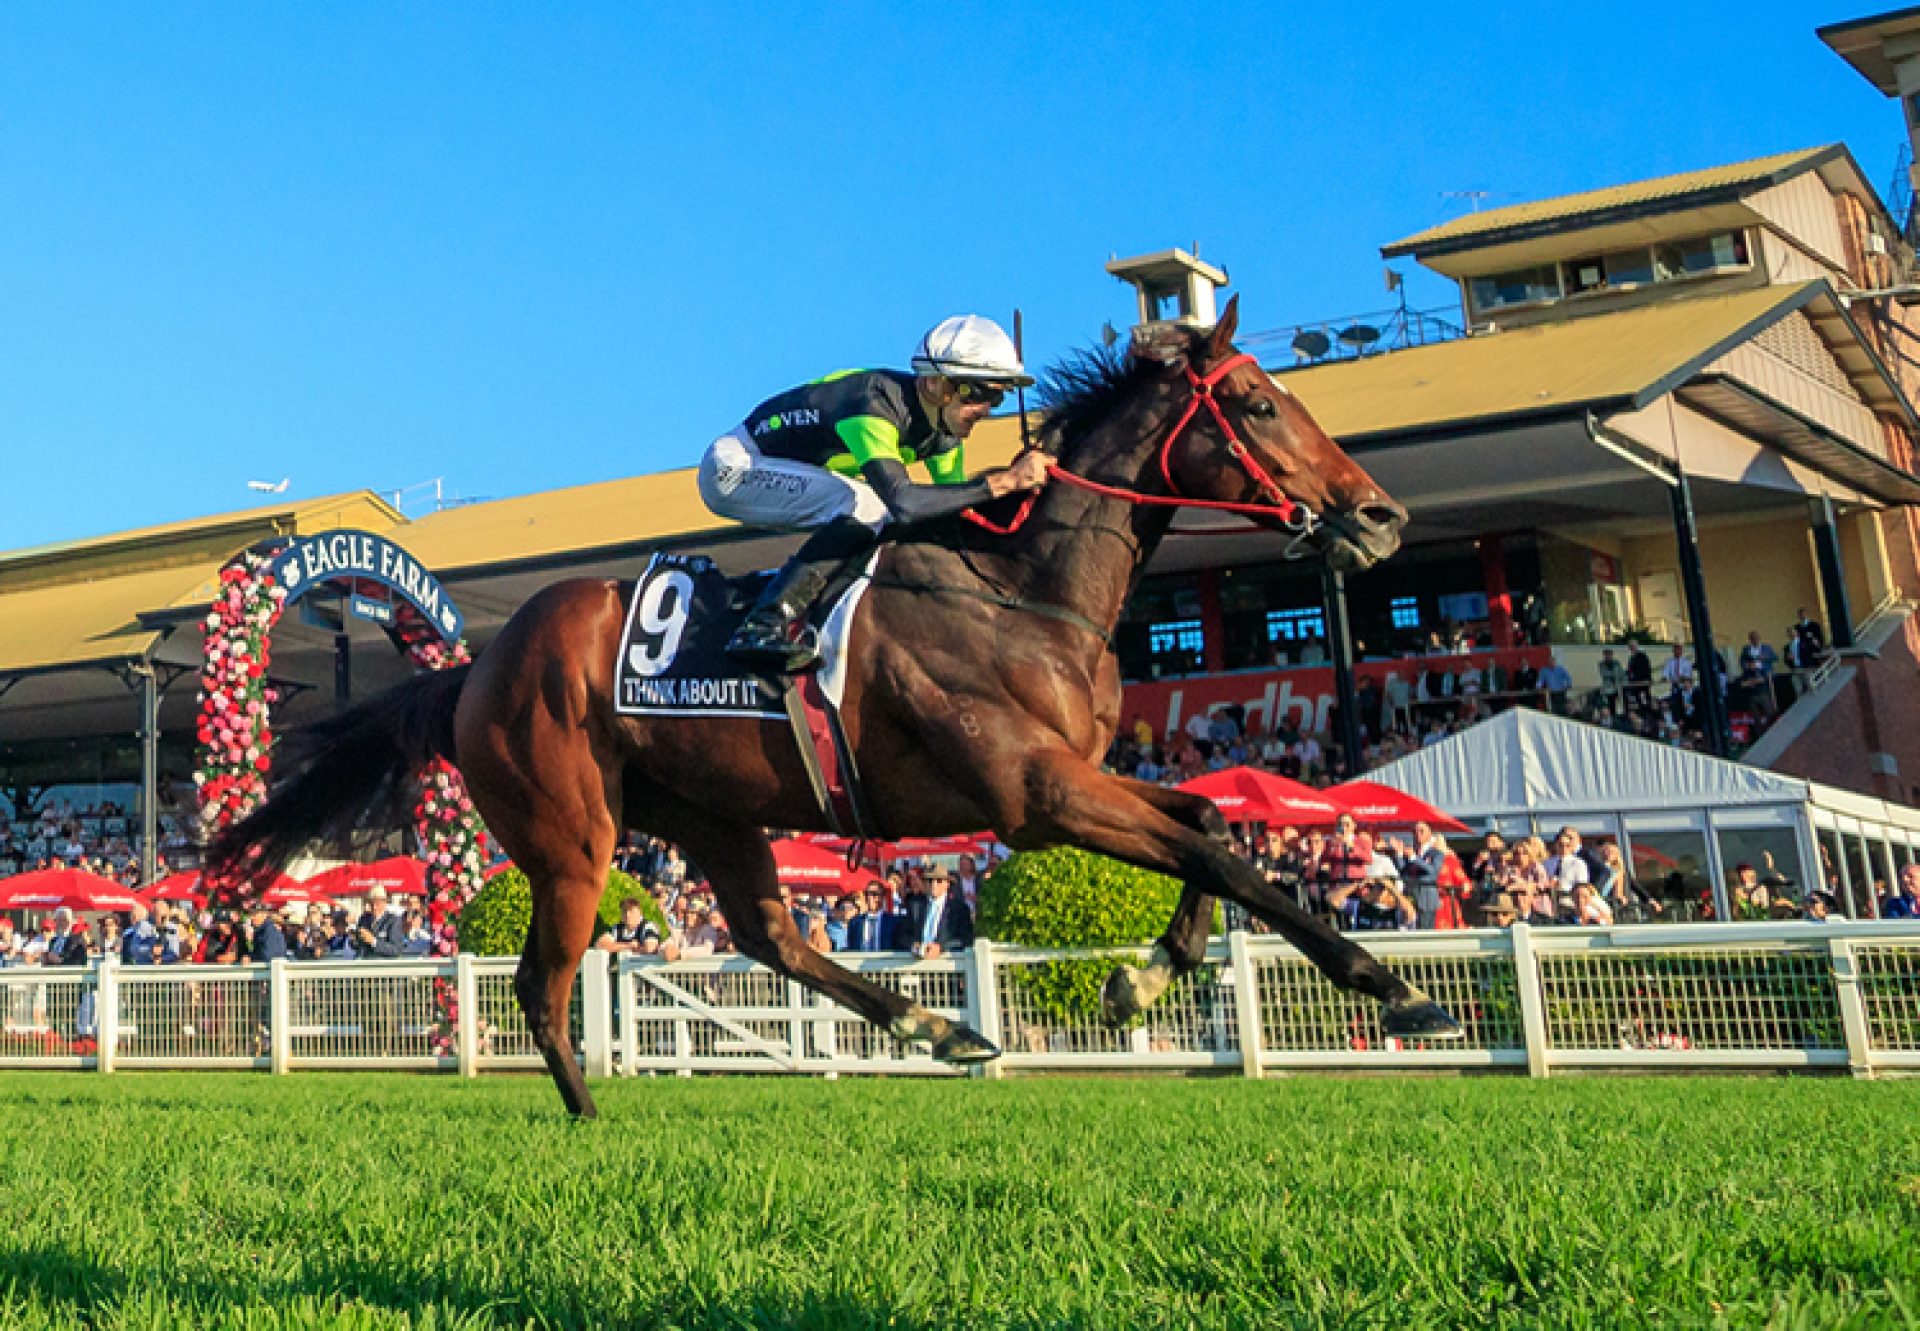 Think About It (So You Think) winning the Gr.1 Stradbroke Handicap at Eagle Farm